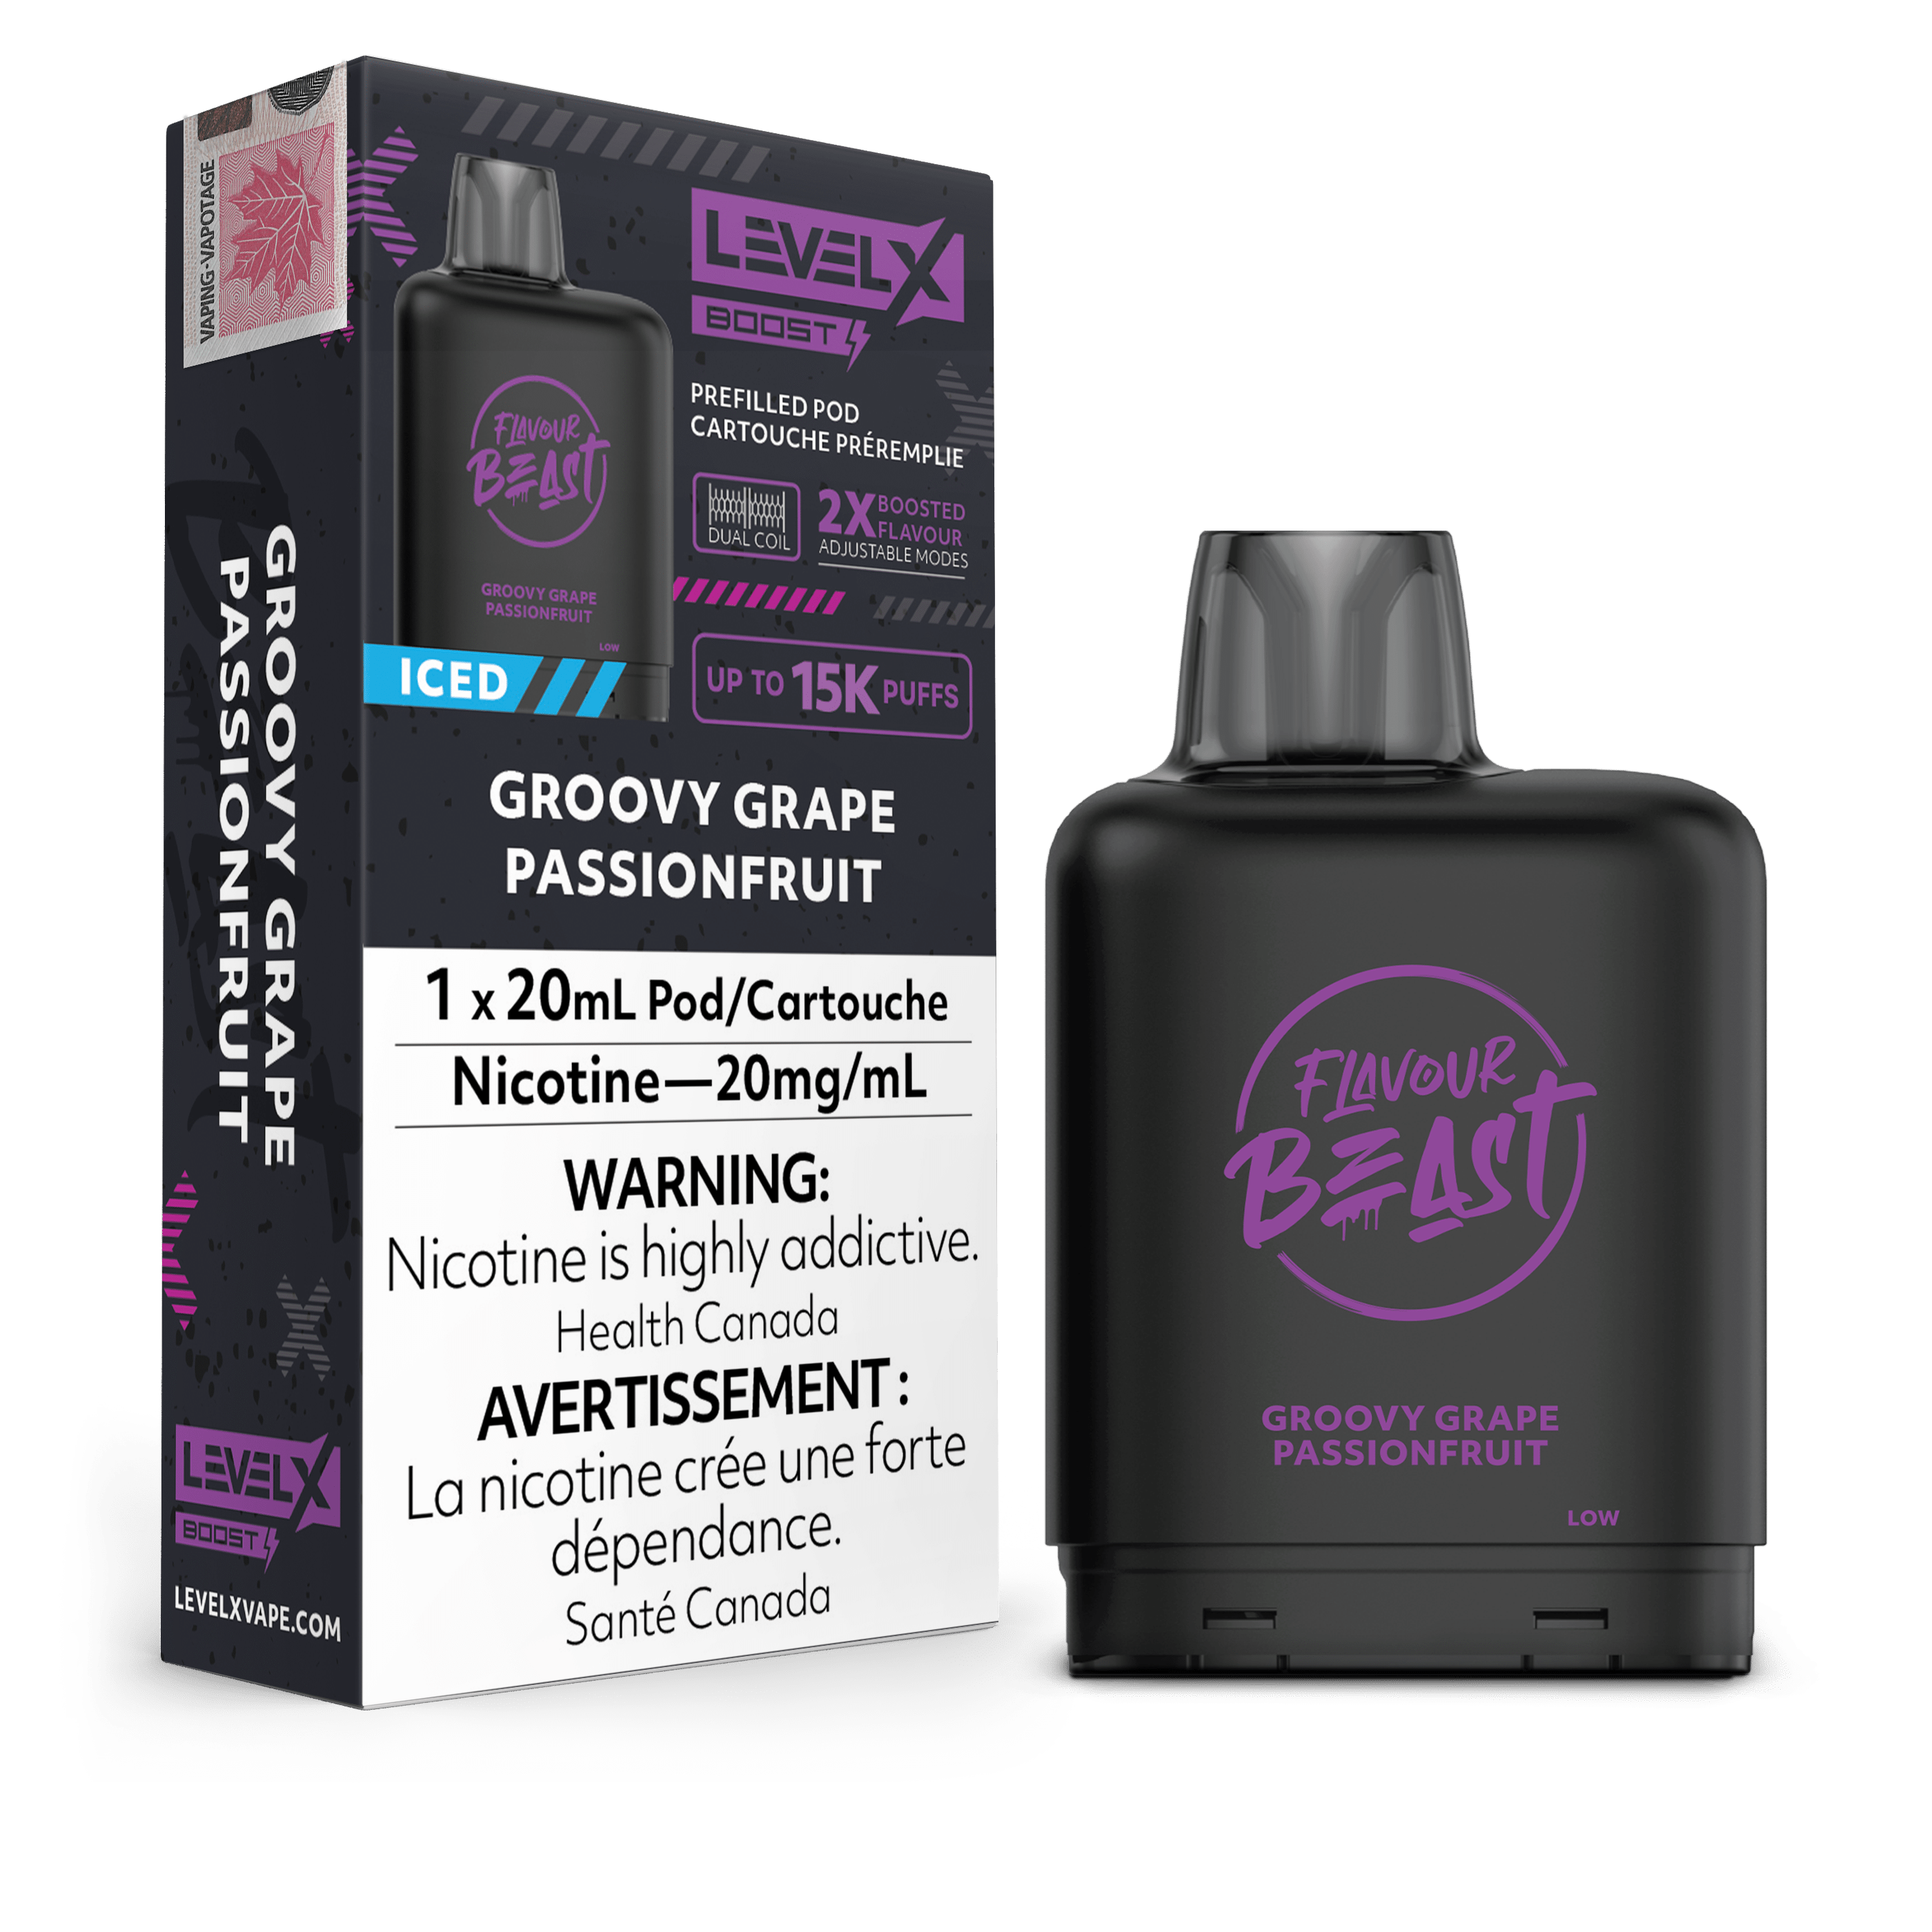 Level X Flavour Beast Boost Pod - Groovy Grape Passionfruit available on Canada online vape shop